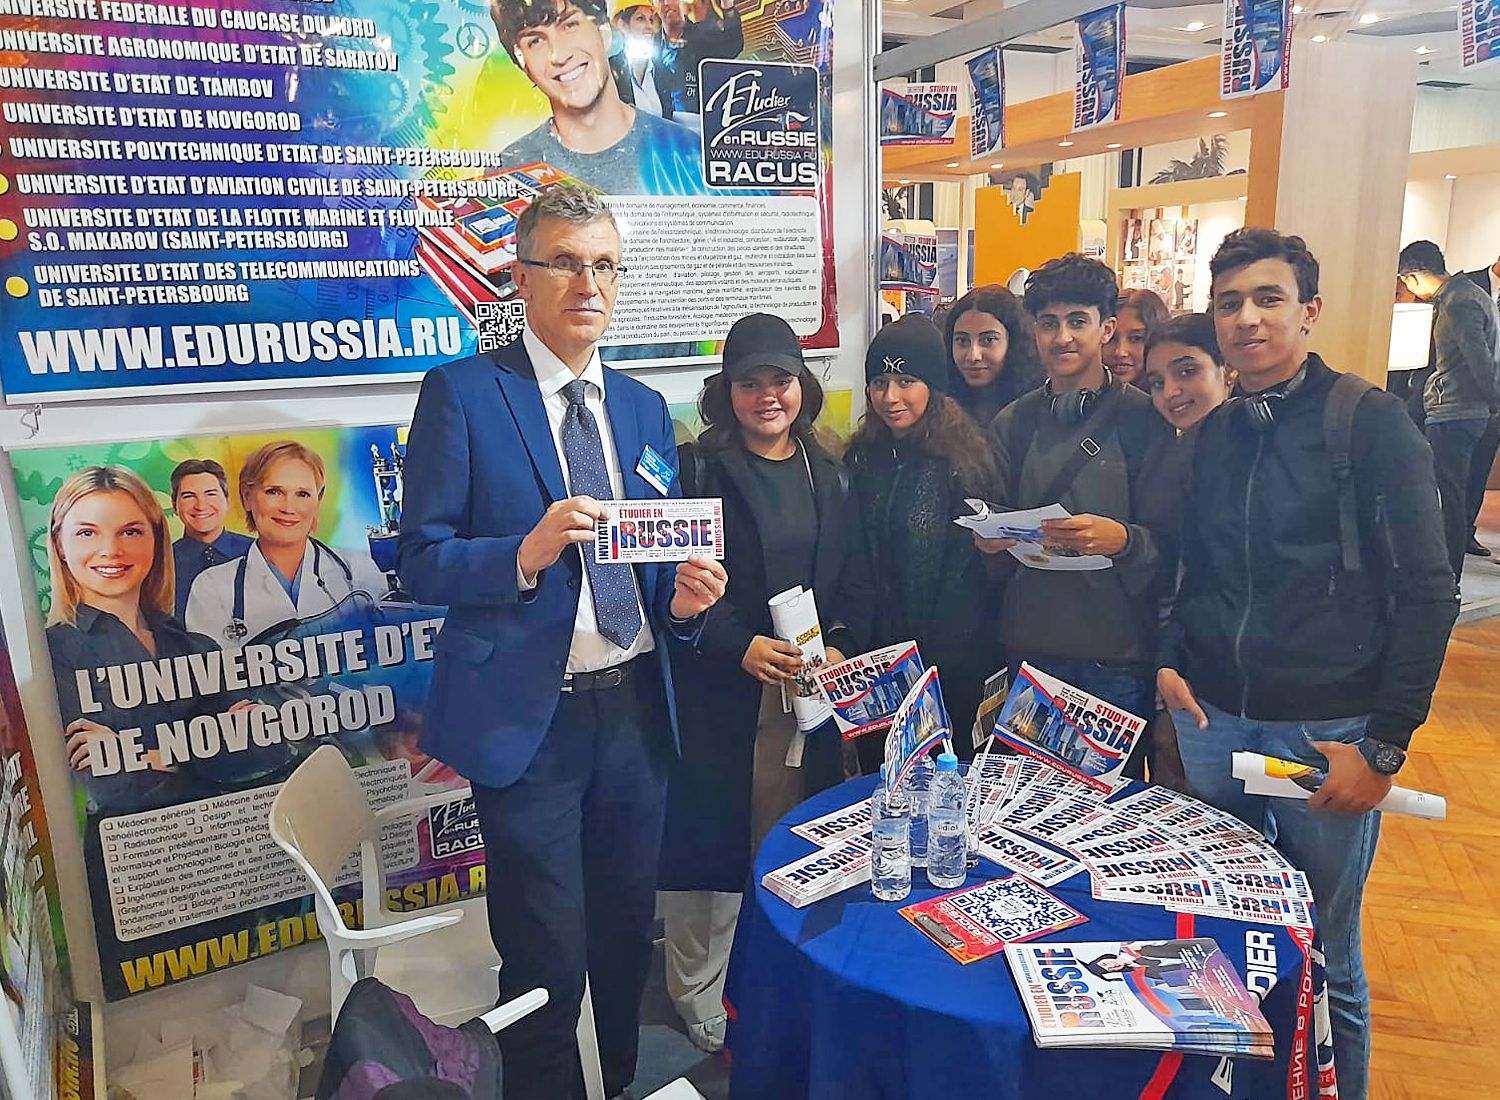 In 2022, Russia entered the TOP 3 countries in the world by the number of foreign students: an incredible success. To date, more than 400,000 foreign students are studying in Russia, of which more than 3,000 are Moroccan citizens. Education today is the reflection of civilization.